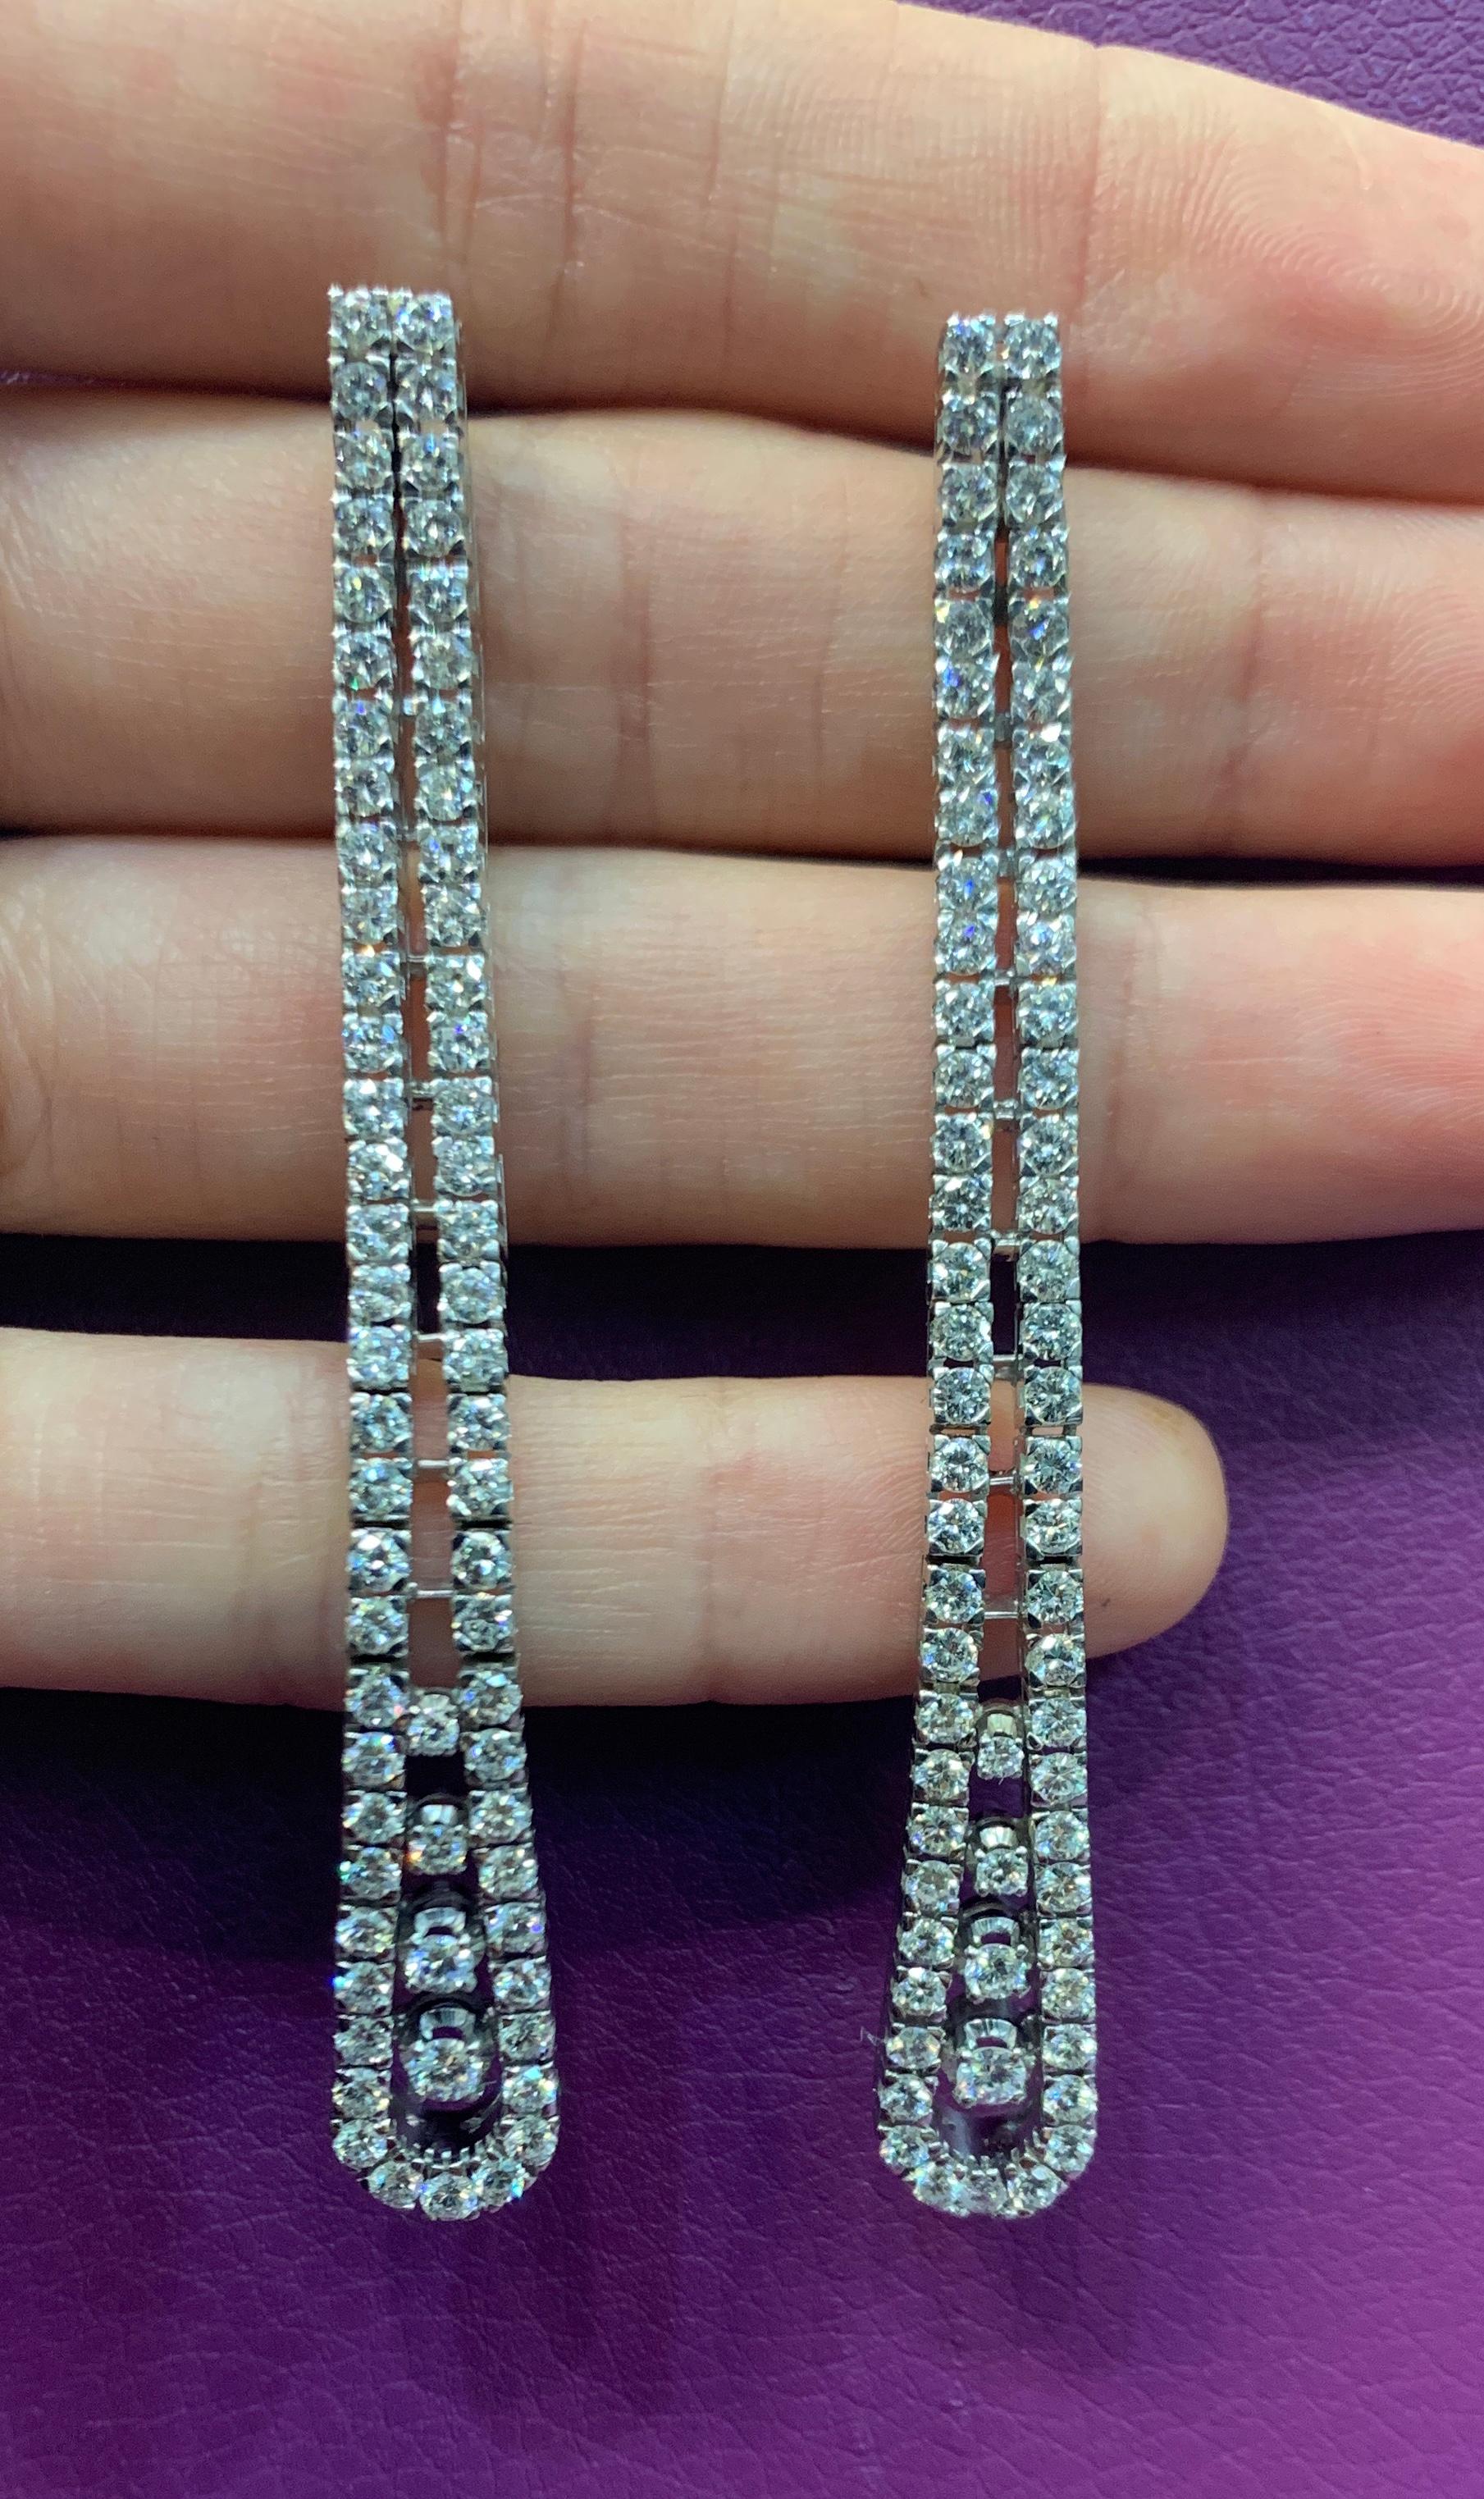 Two Row Diamond Dangle Earrings
134 brilliant cut diamonds set in 18K white gold 
Diamond Weight: Approximately 6.55 Cts  
Measurements: 2.75